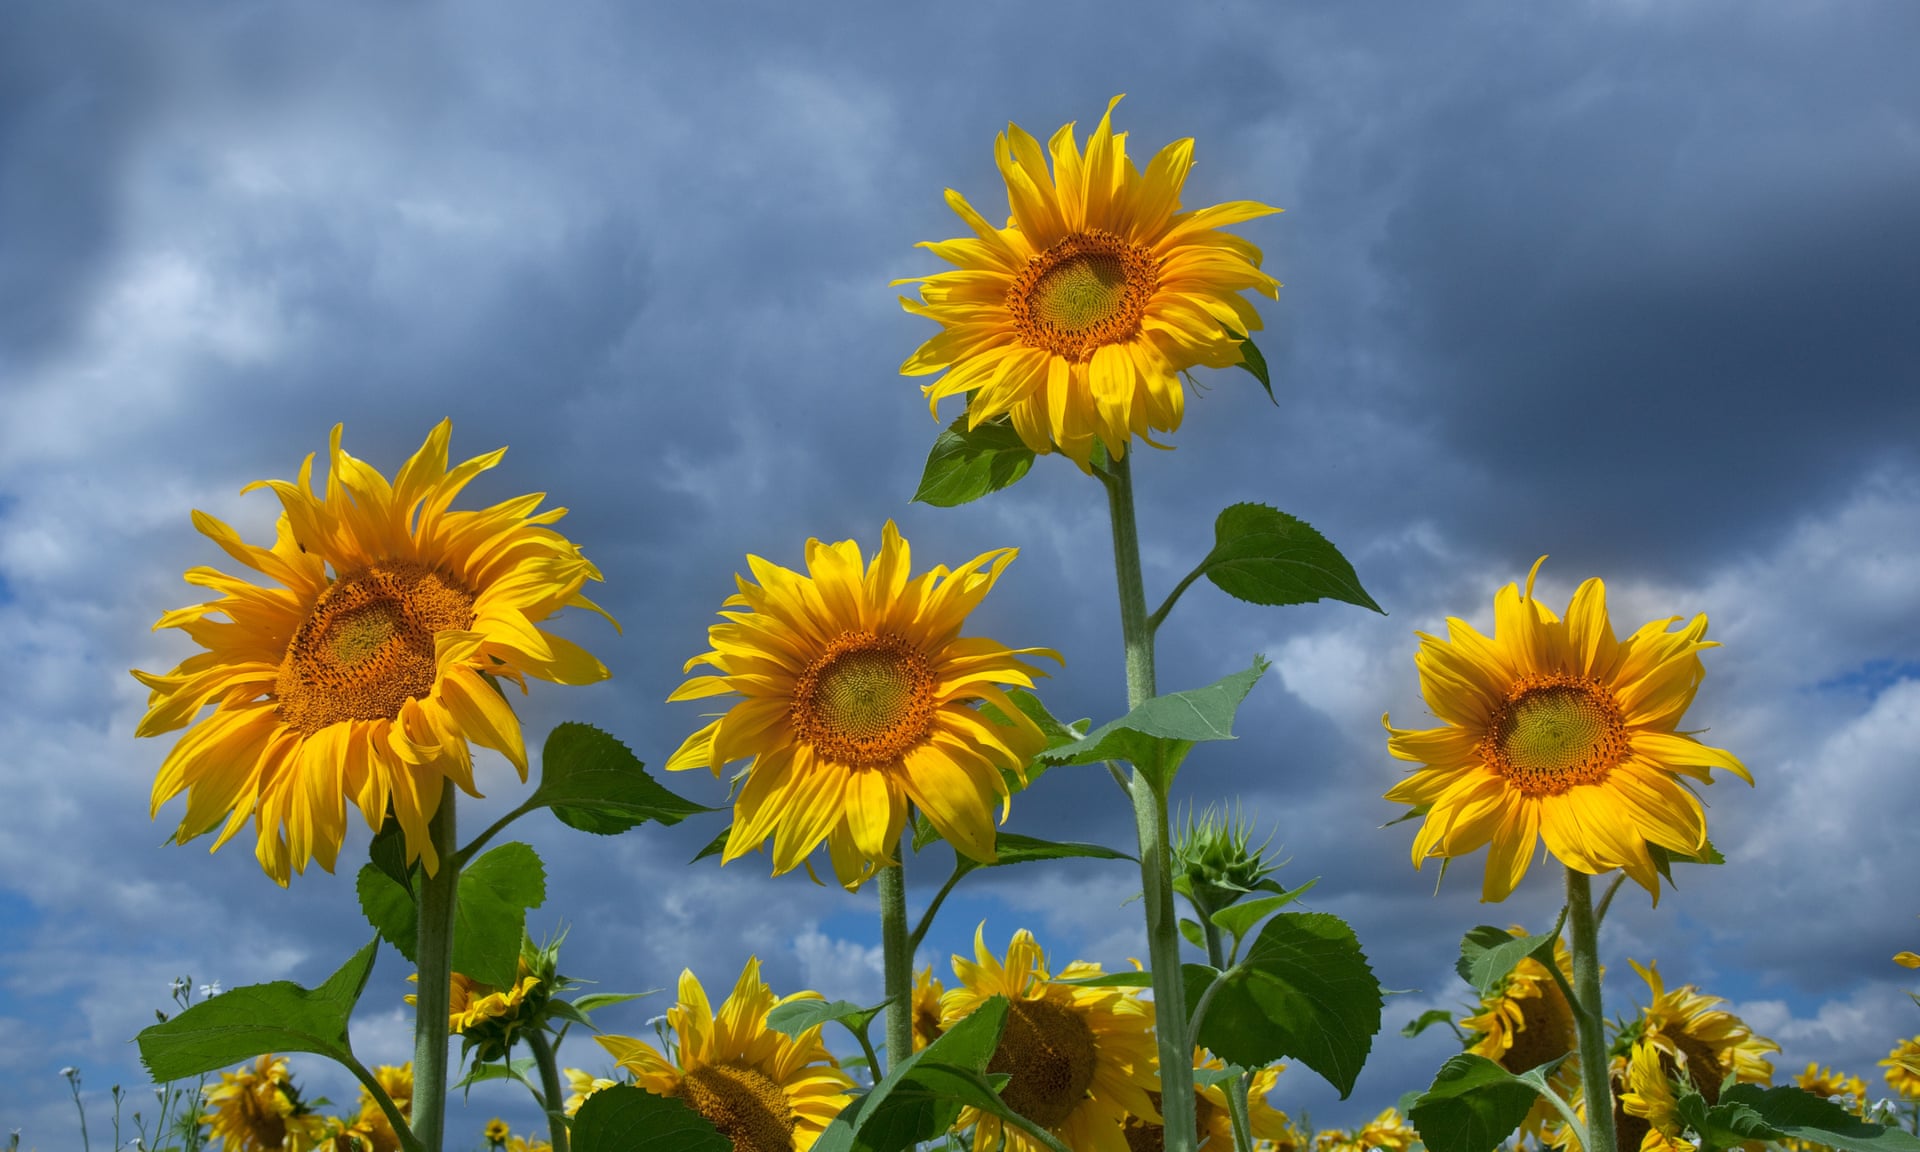 Sunflowers were planted to act as a windshield for bee nesting support areas Photograph: Alamy